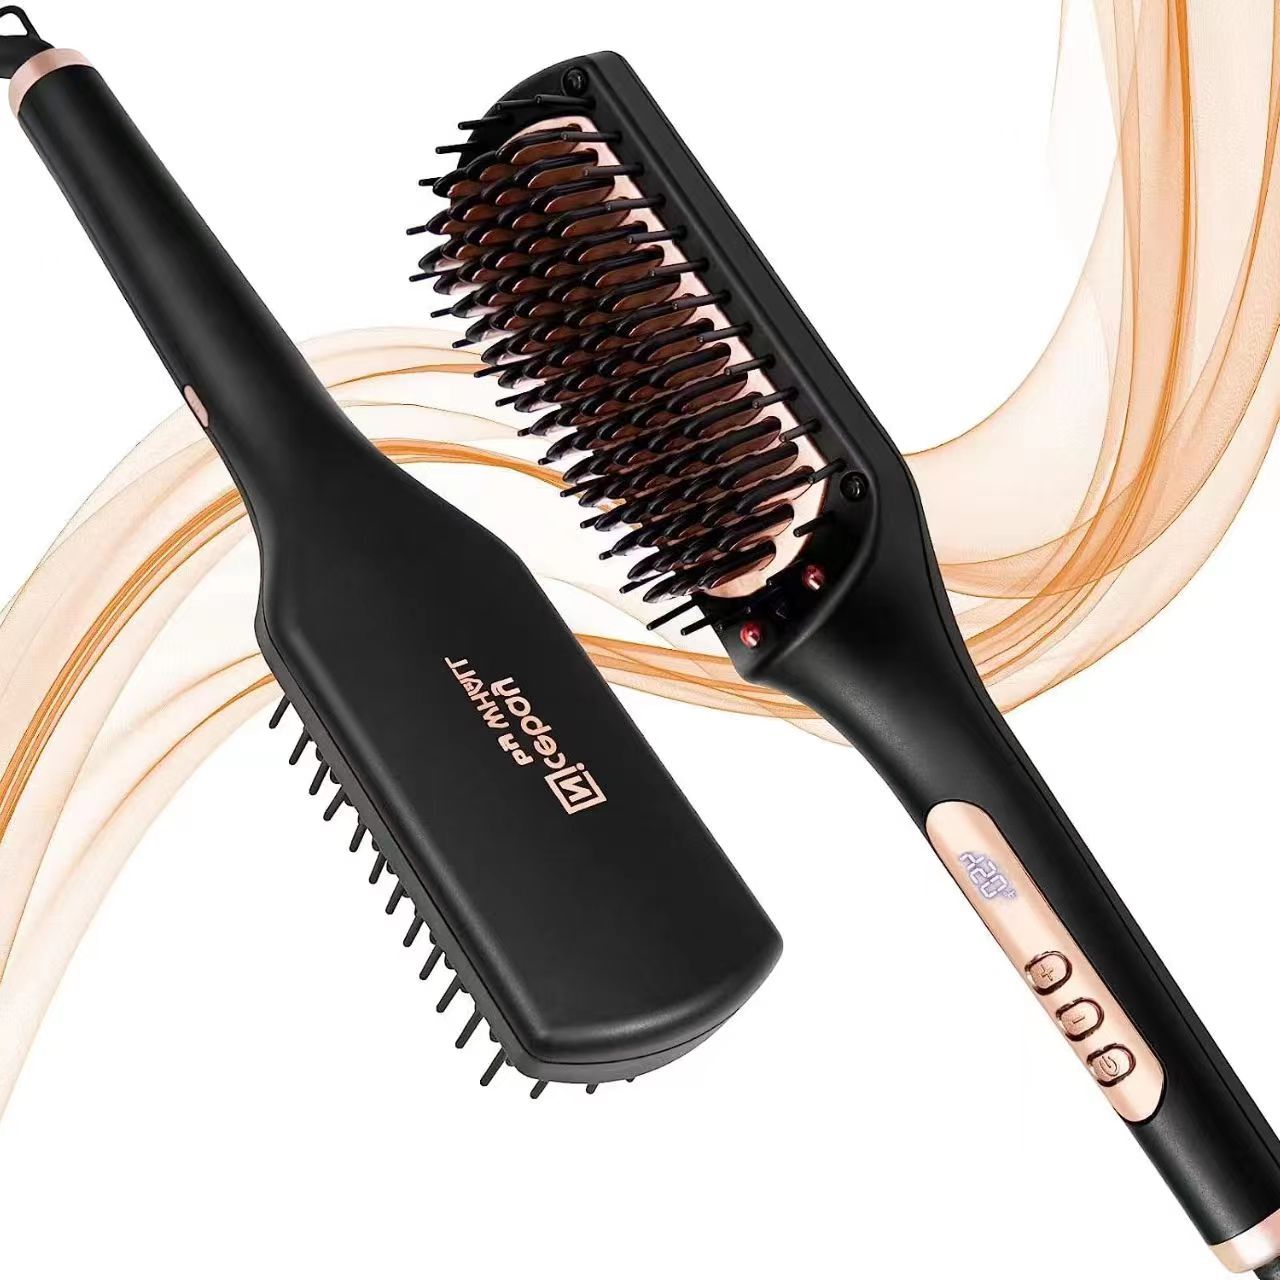 NICEBAY®HS-101 Hair Straightener Brush, Ionic Hair Straightener Comb with 6 Temp,Auto-Off & Anti-Scald & Effective Hair Care